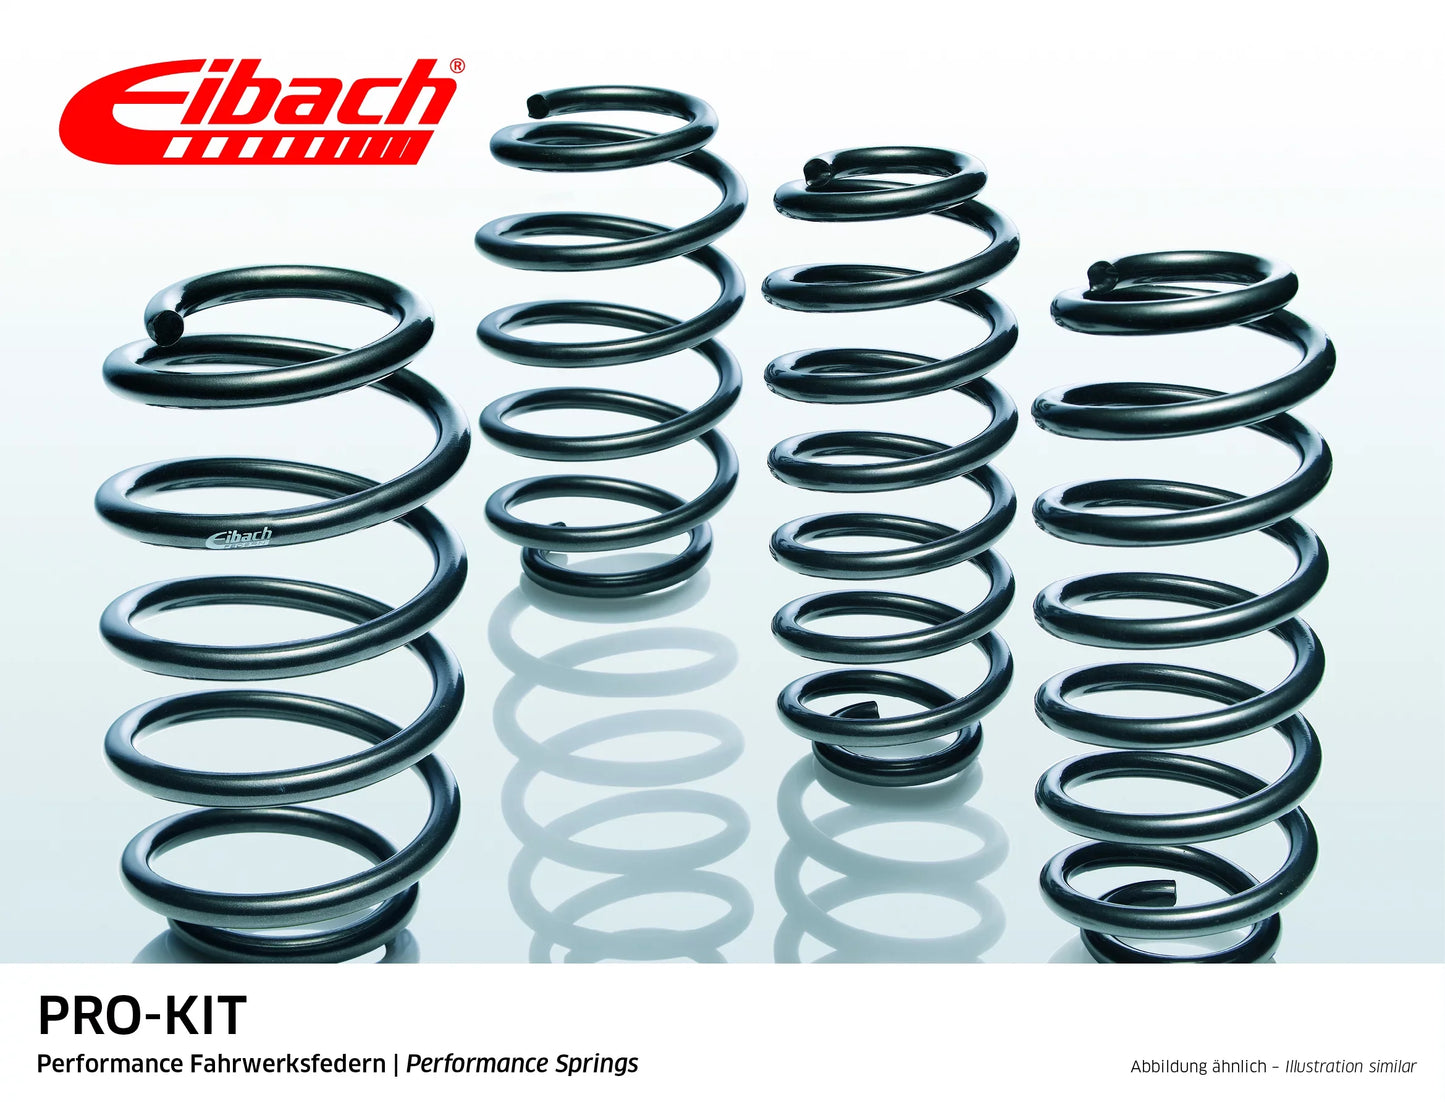 Eibach Pro-Kit Lowering Springs (E1527-140) at £244.80